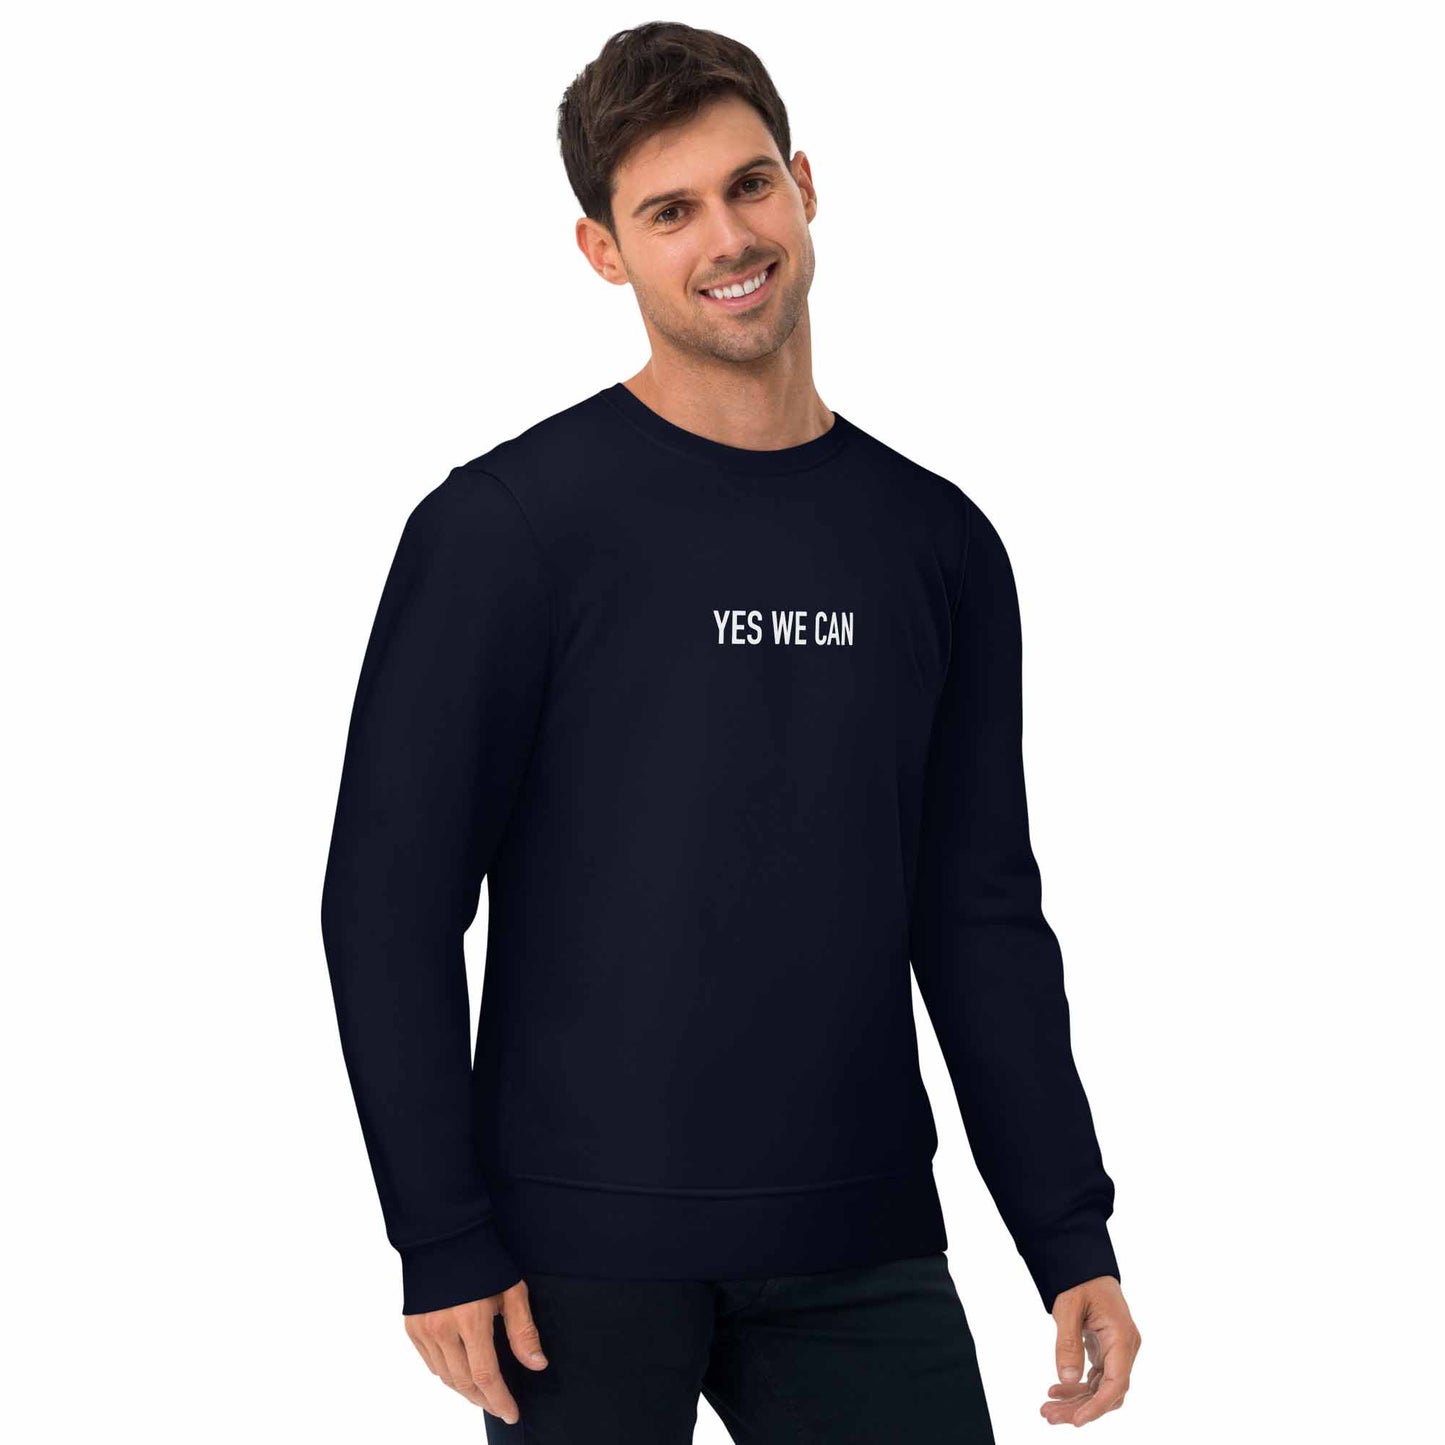 Men navy inspirational sweatshirt with Barack Obama's inspirational quote, "Yes We Can."